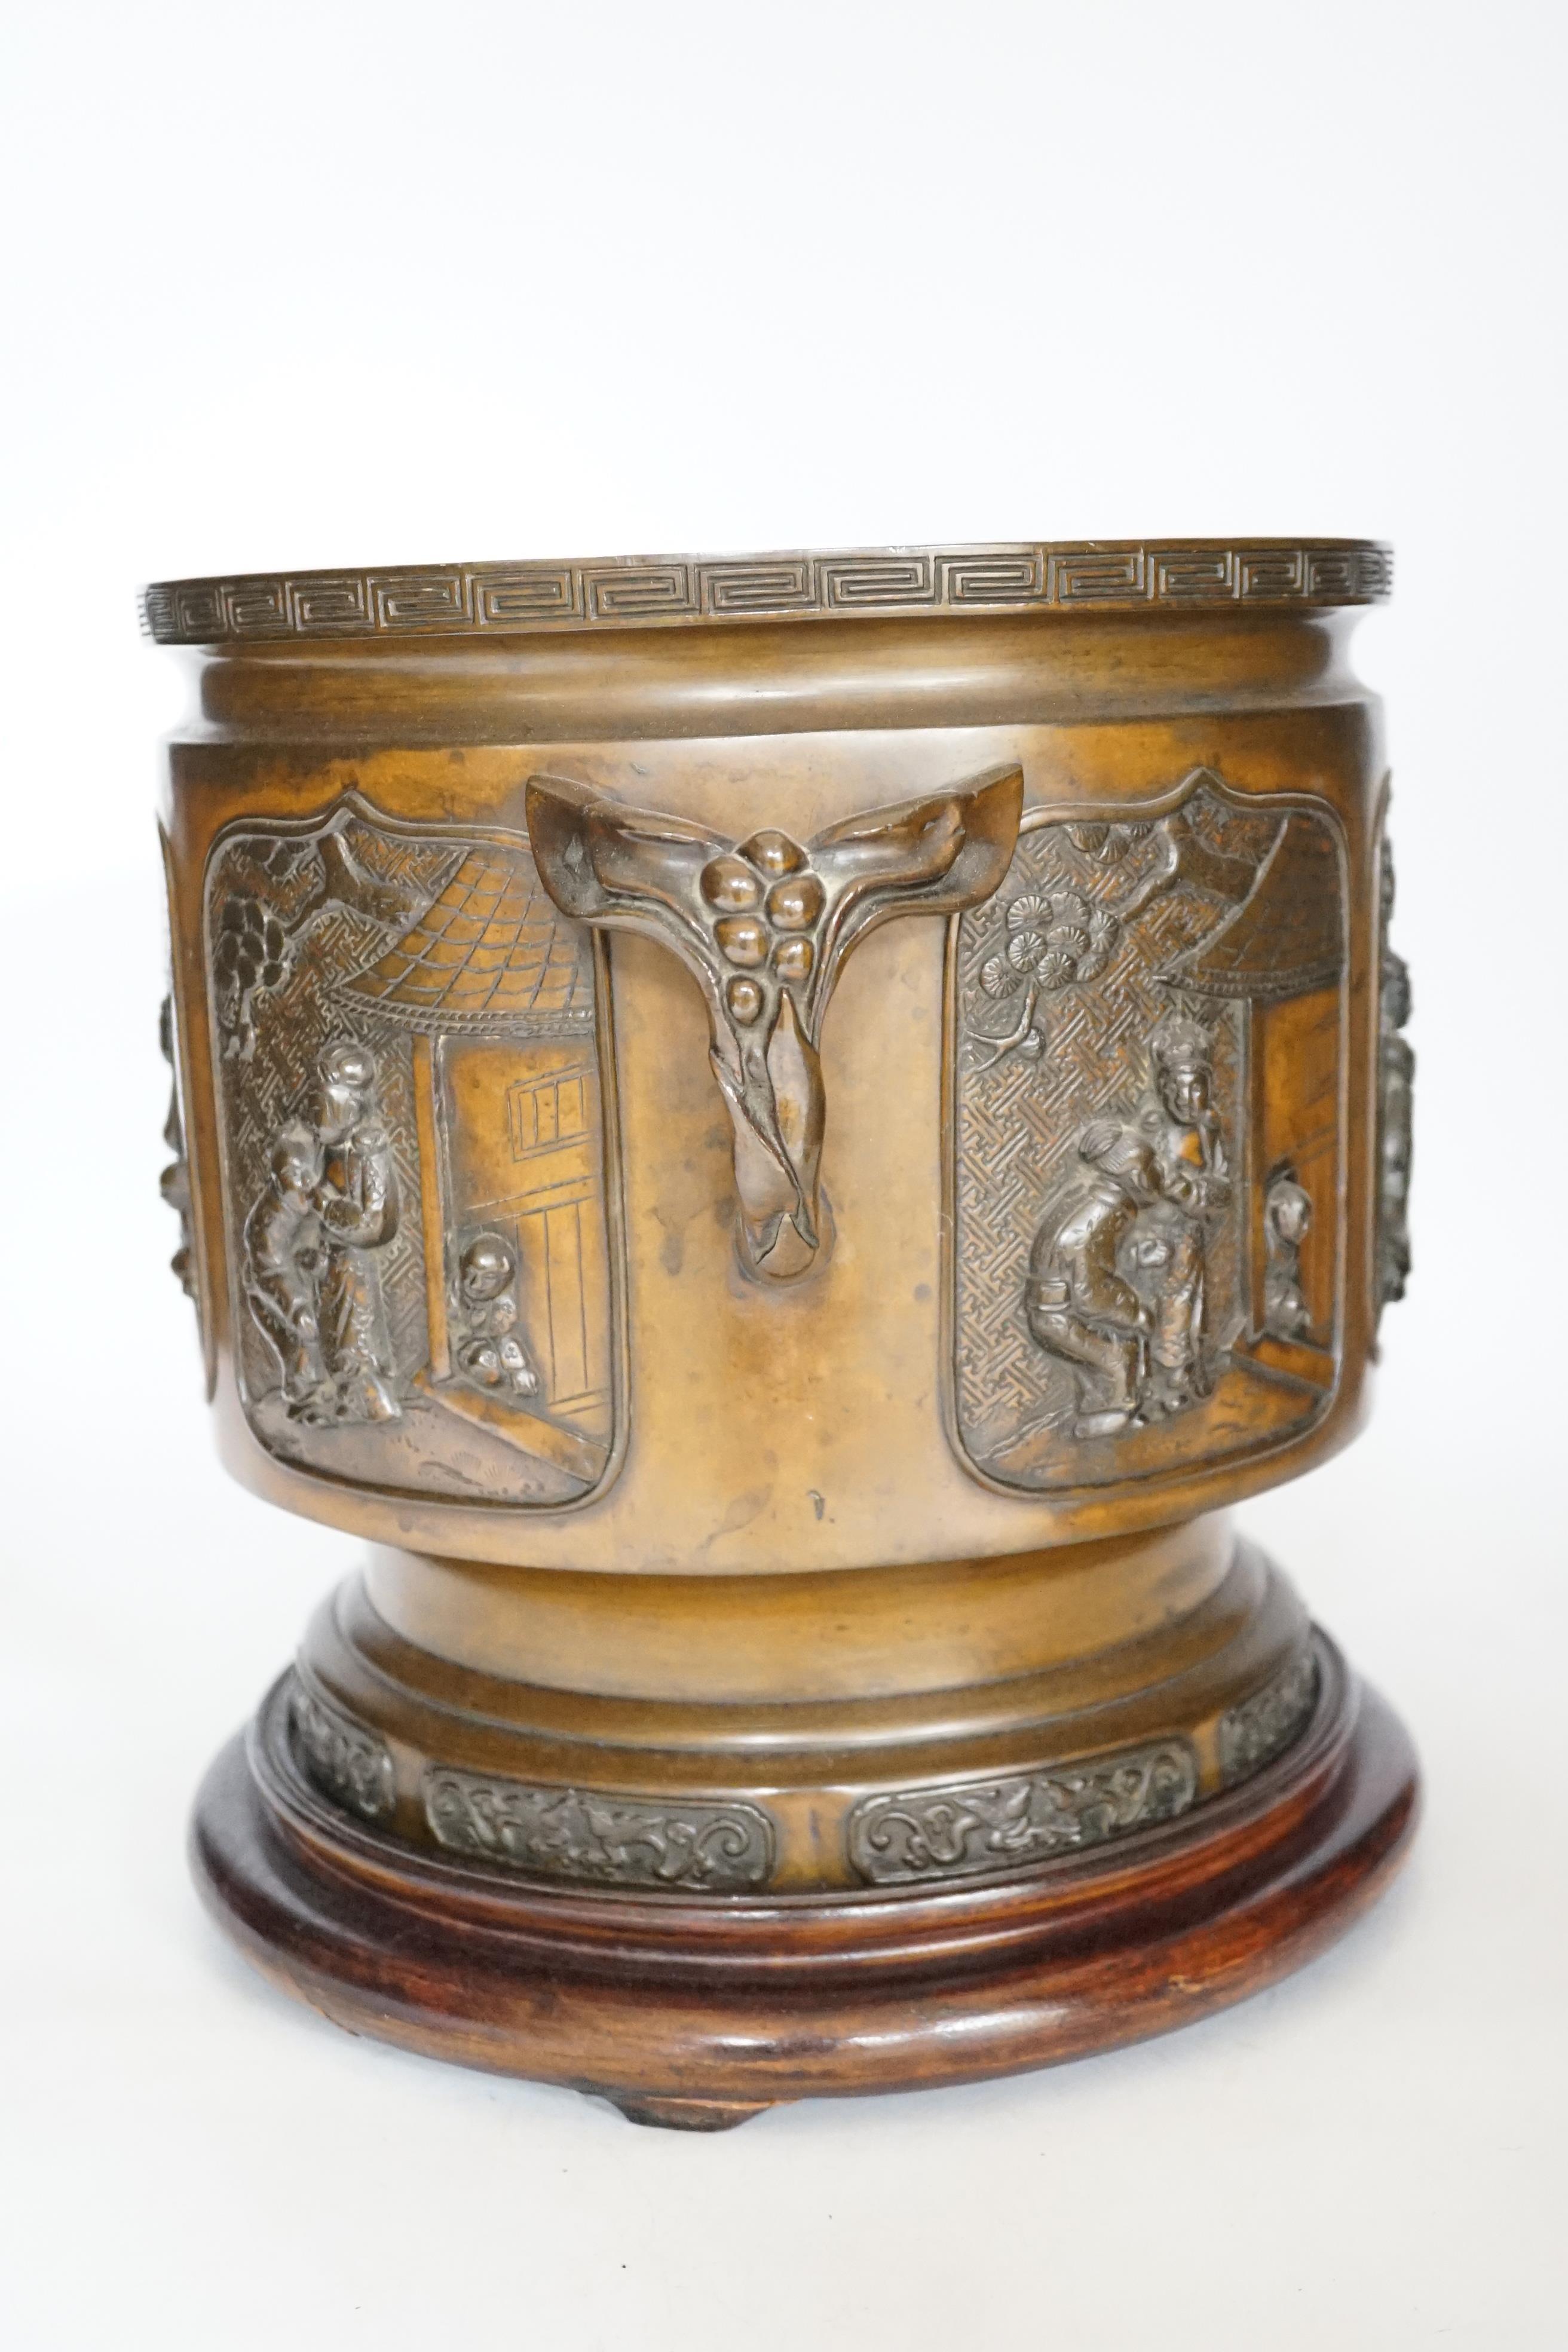 A large 19th century Japanese bronze two handled censer on stand, 28cm high